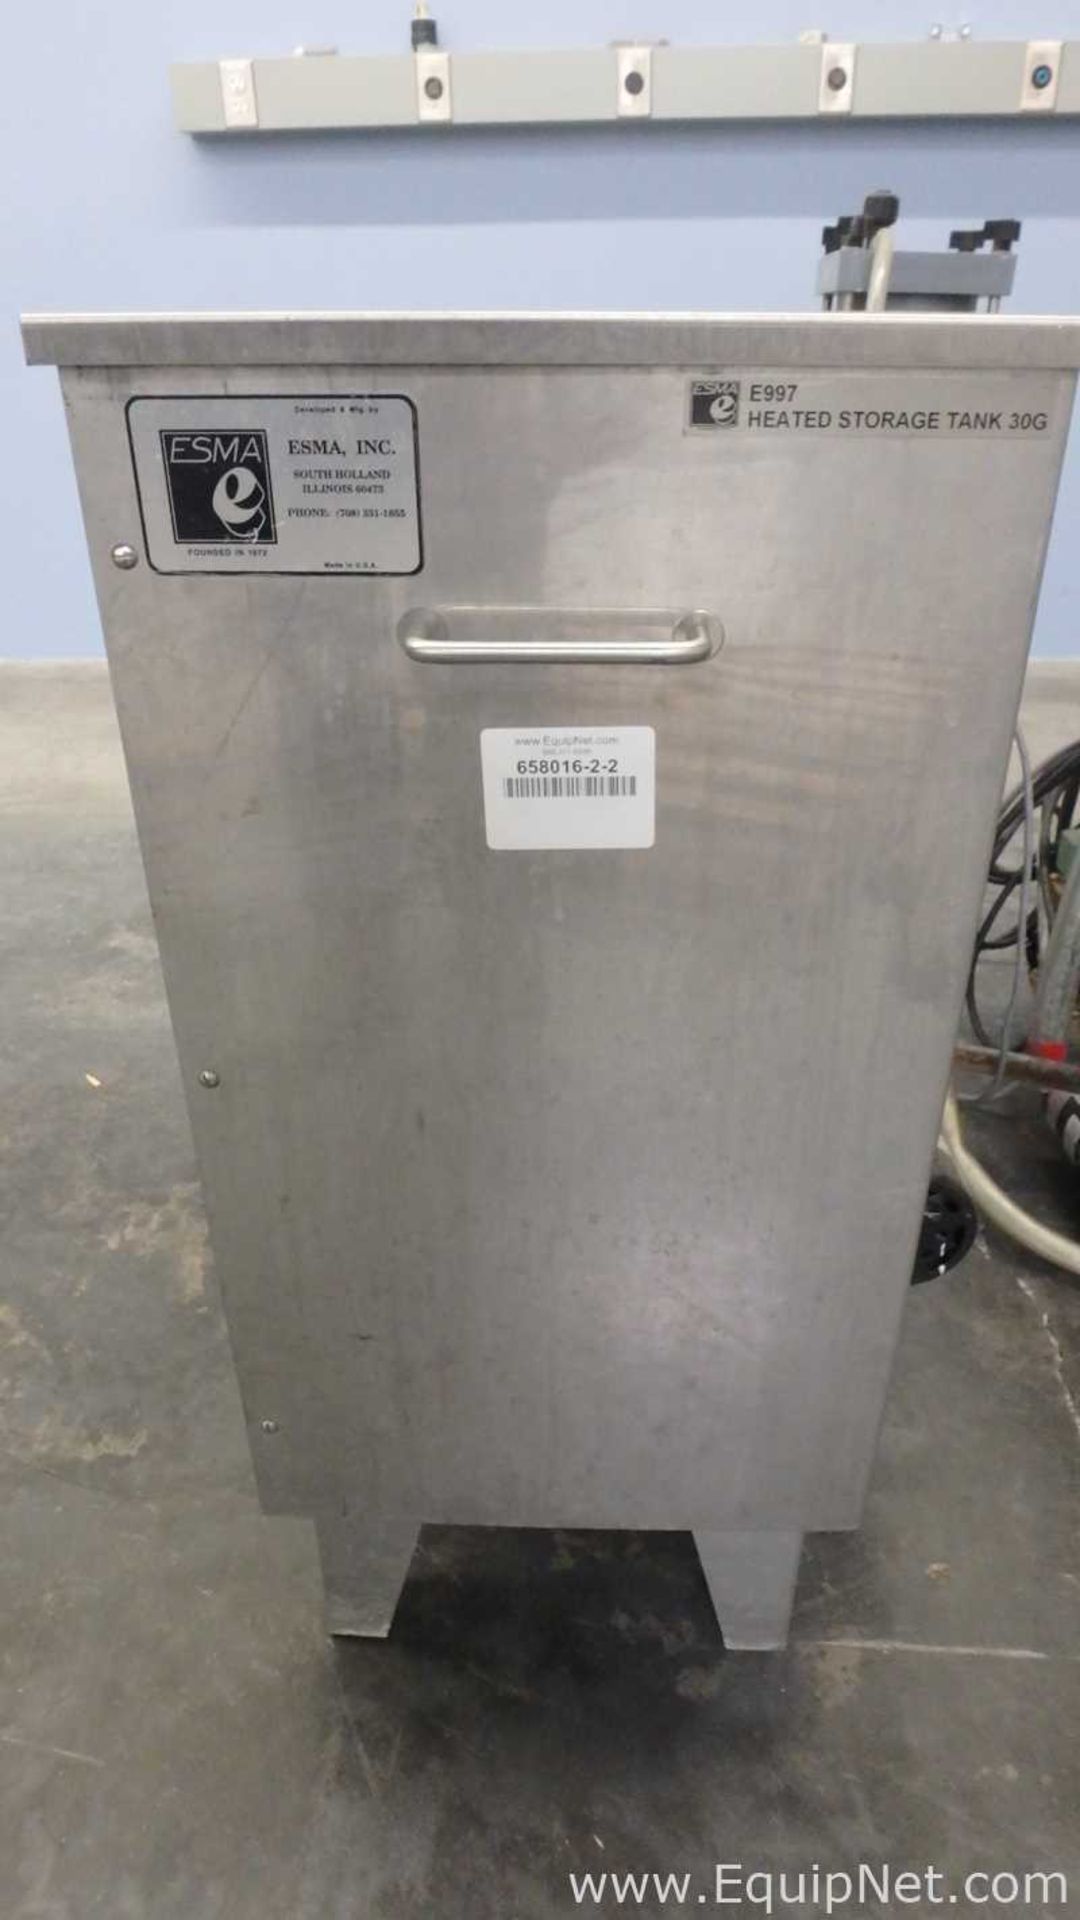 ESMA Inc. E700 Ultrasonic Cleaning System with E997 30Gal Heated Storage Tank - Image 21 of 26